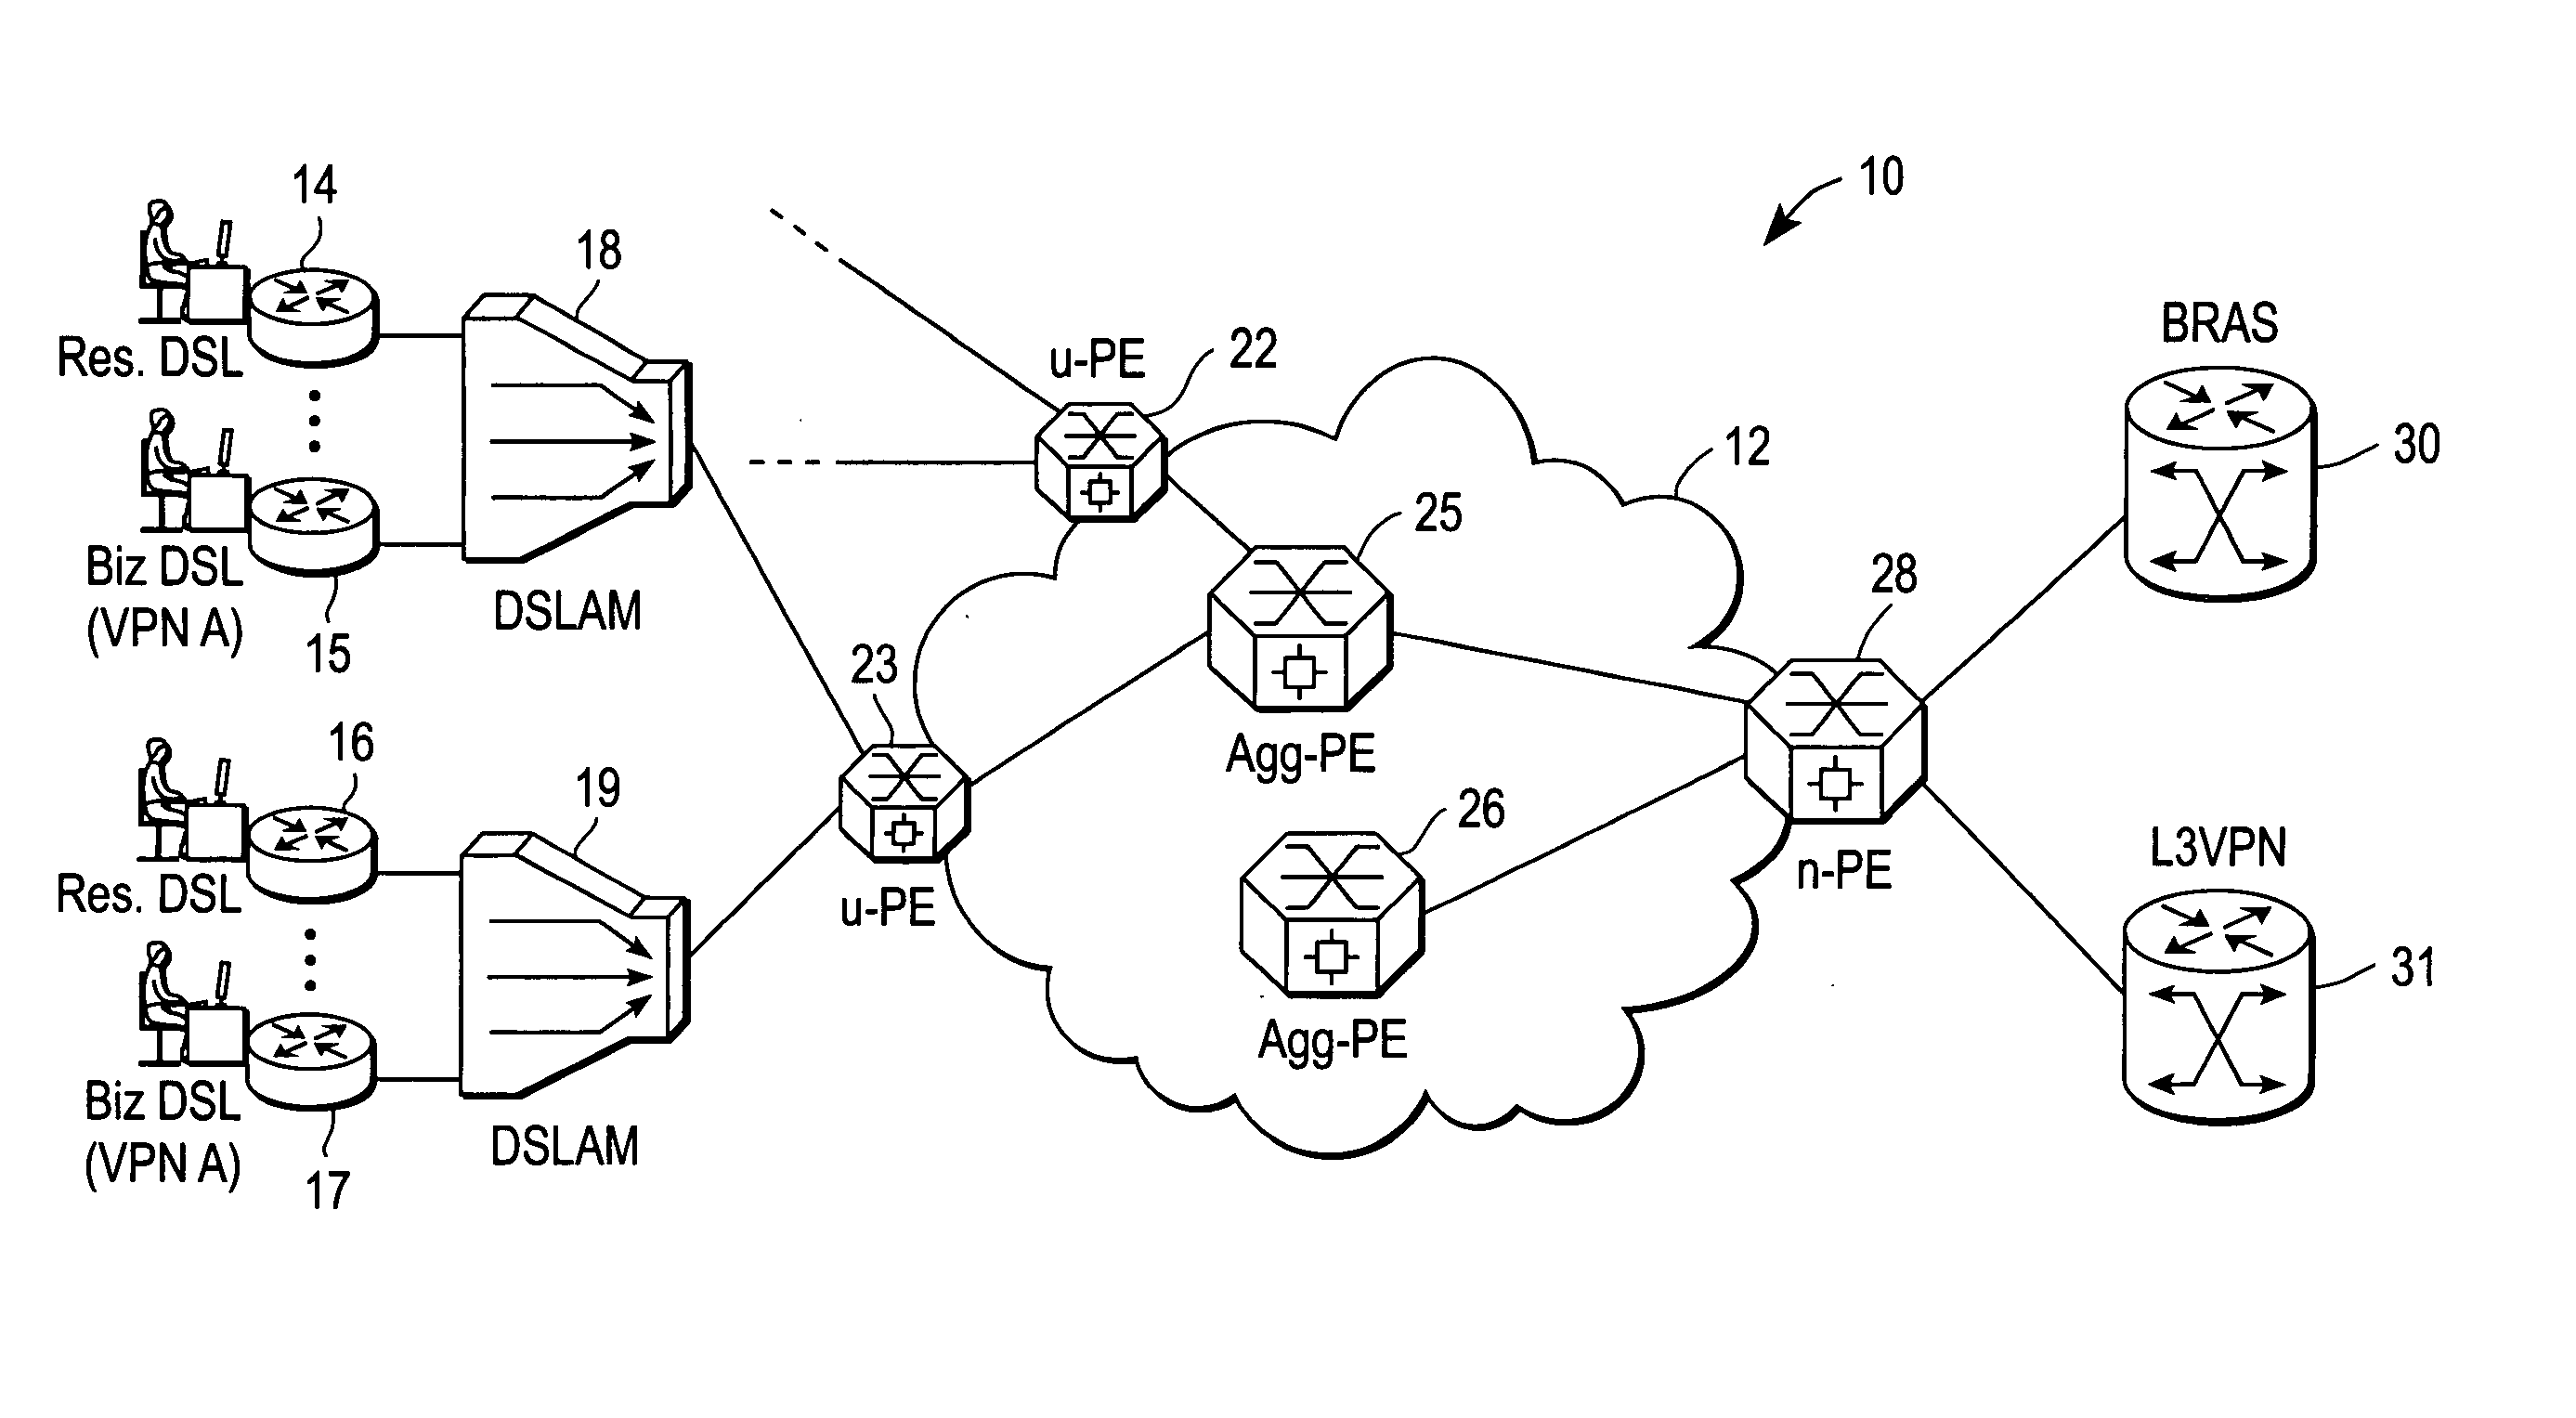 Scalable system and method for DSL subscriber traffic over an Ethernet network